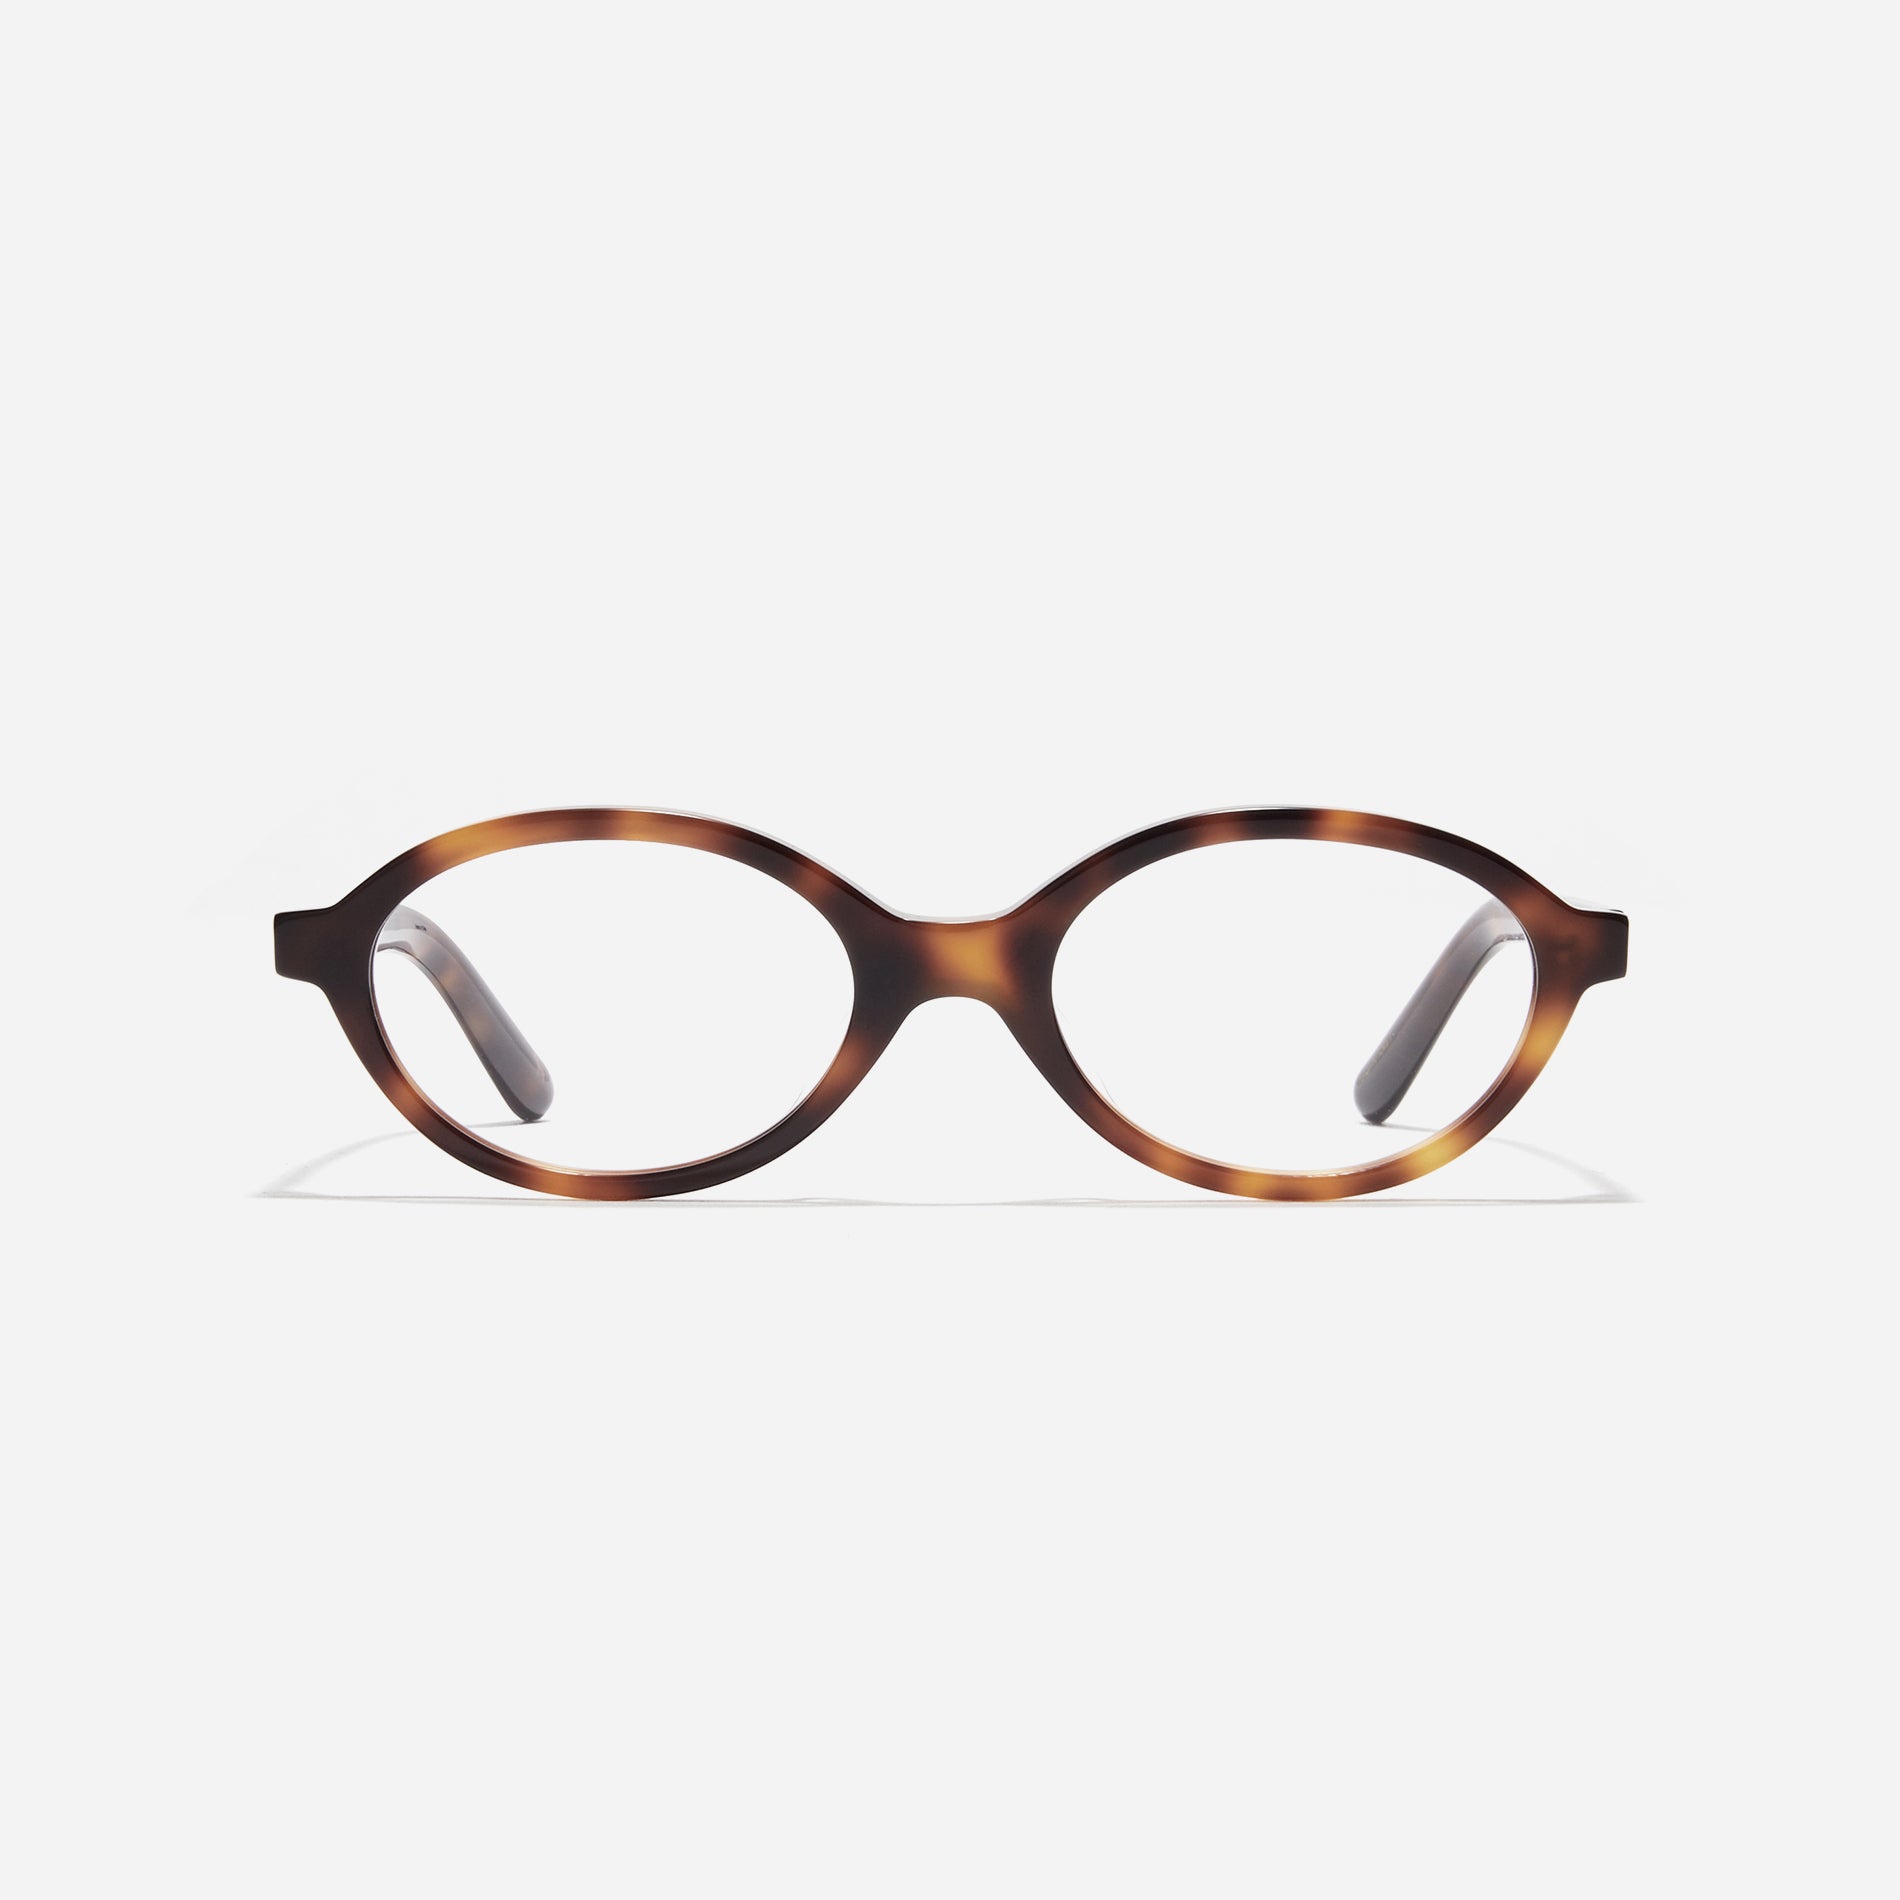 Compact, oval-shaped horn-rimmed eyeglasses featuring a narrow rim and bold frame. Their design captures a modern reinterpretation of 90s retro vibes, providing a trendy and stylish look.